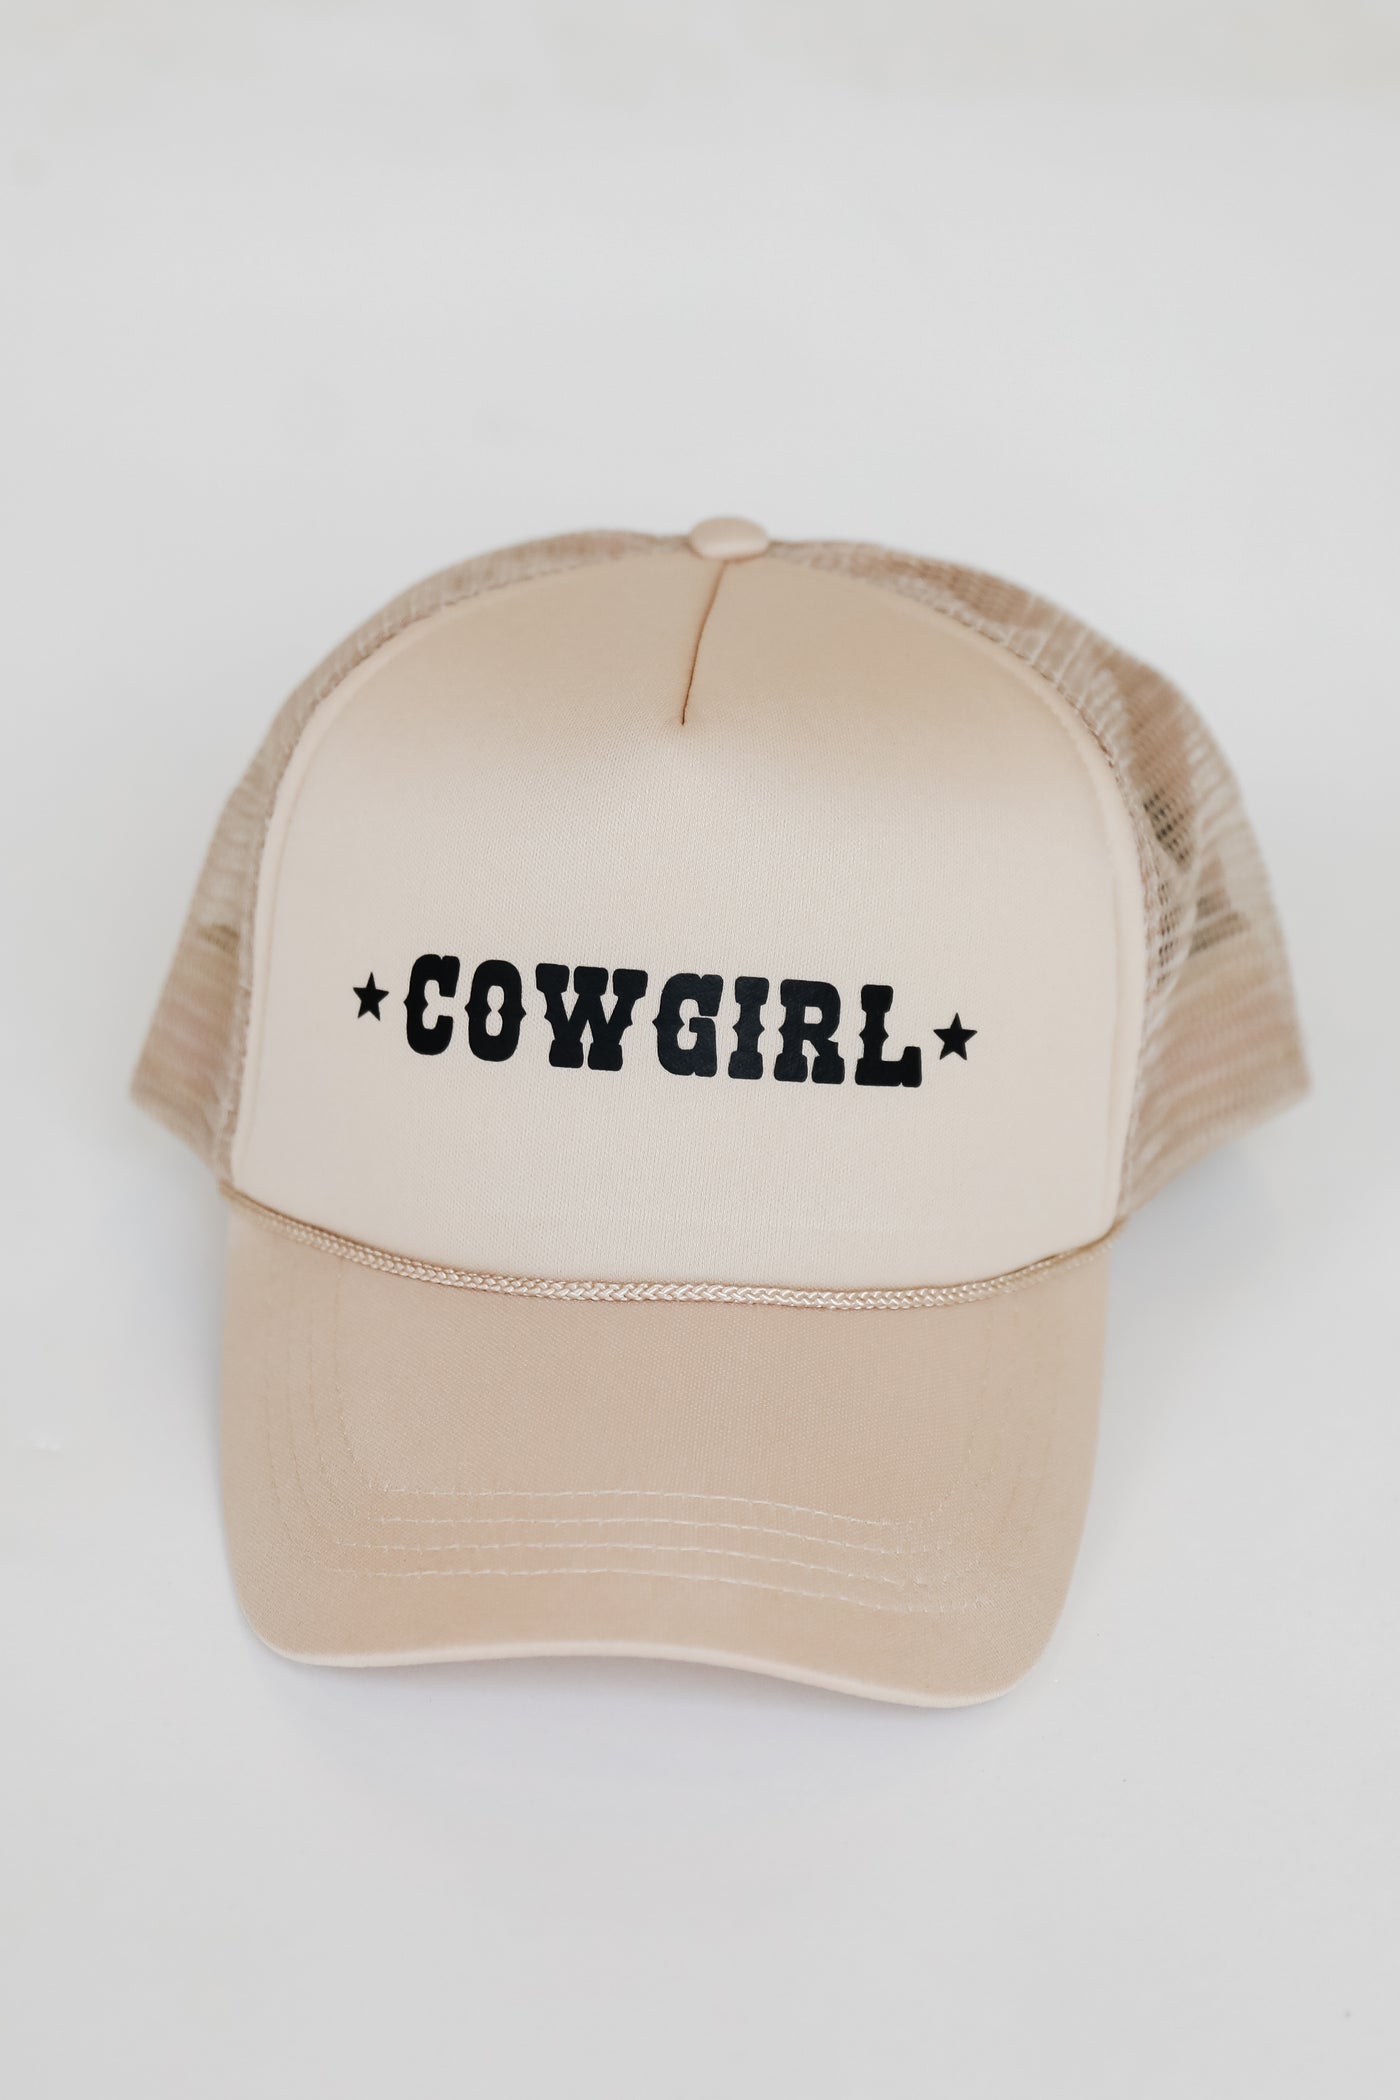 Cowgirl Trucker Hat from dress up